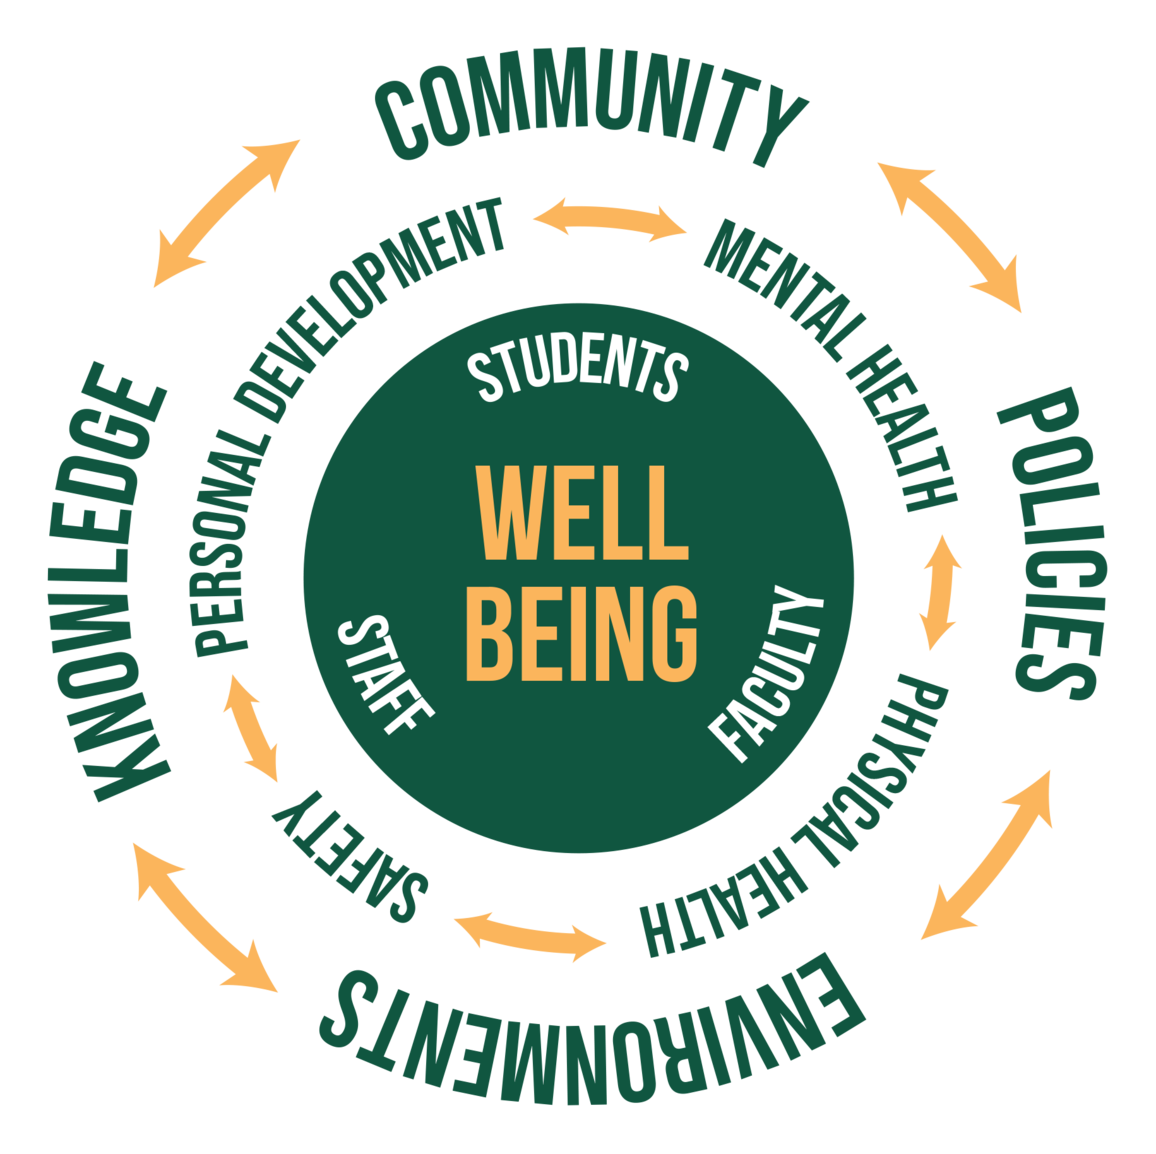 Three concentric circles: Well Being>Students, Faculty, Staff>Personal Development, Safety, Physical Health, Mental Health>Community, Policies, Environments, Knowledge